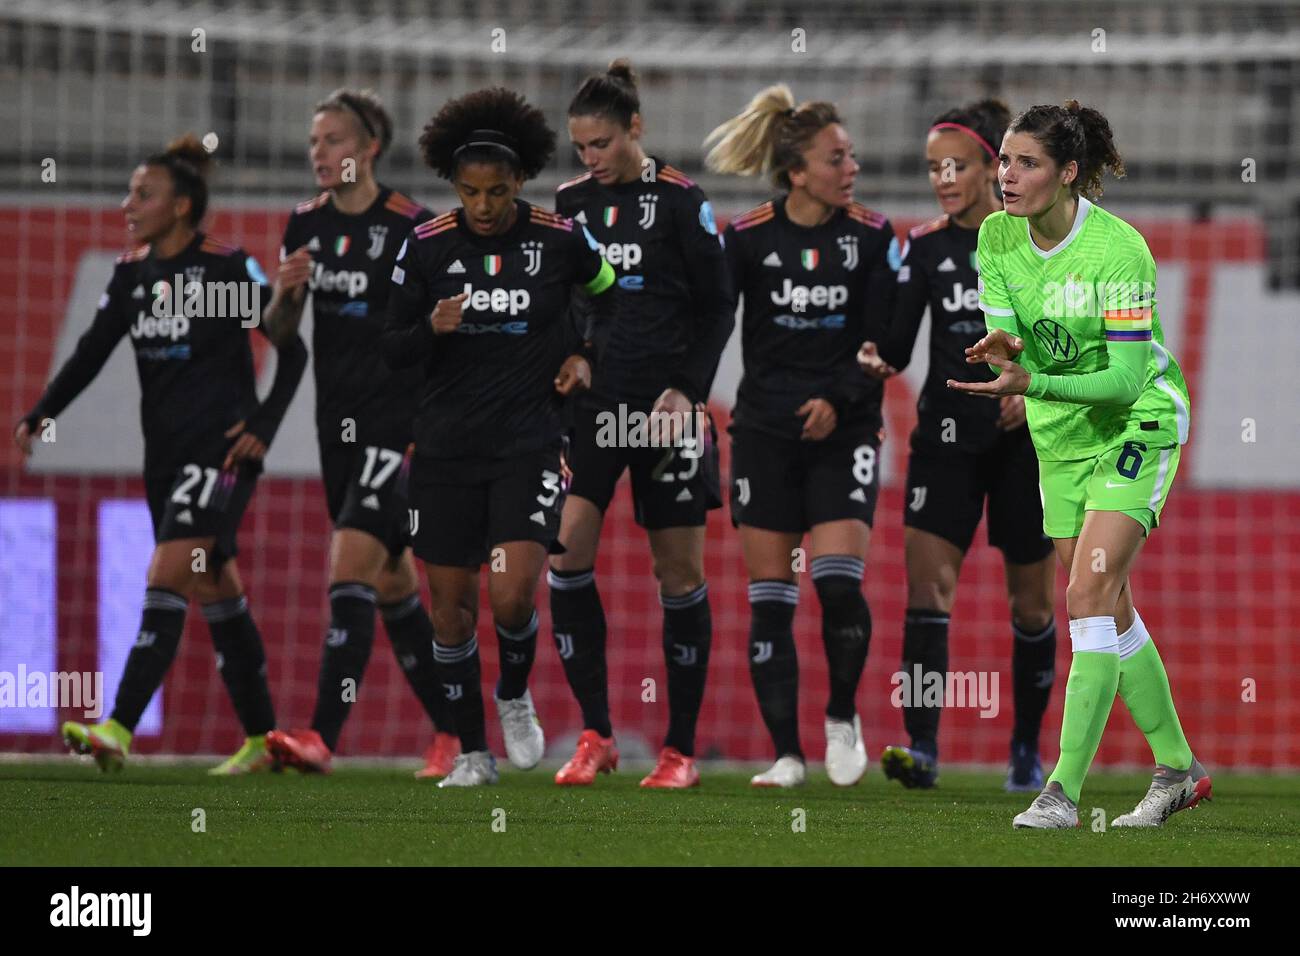 Wolfsburg, Germany. 18th Nov, 2021. Football, Women: Champions League, VfL Wolfsburg - Juventus Turin, Group Stage, Group A, Matchday 4 at AOK Stadion. Wolfsburg's Dominique Janssen (r) cheers on her team after Turin's Lina Hurtig scored to make it 0:1. Credit: Swen Pförtner/dpa/Alamy Live News Stock Photo